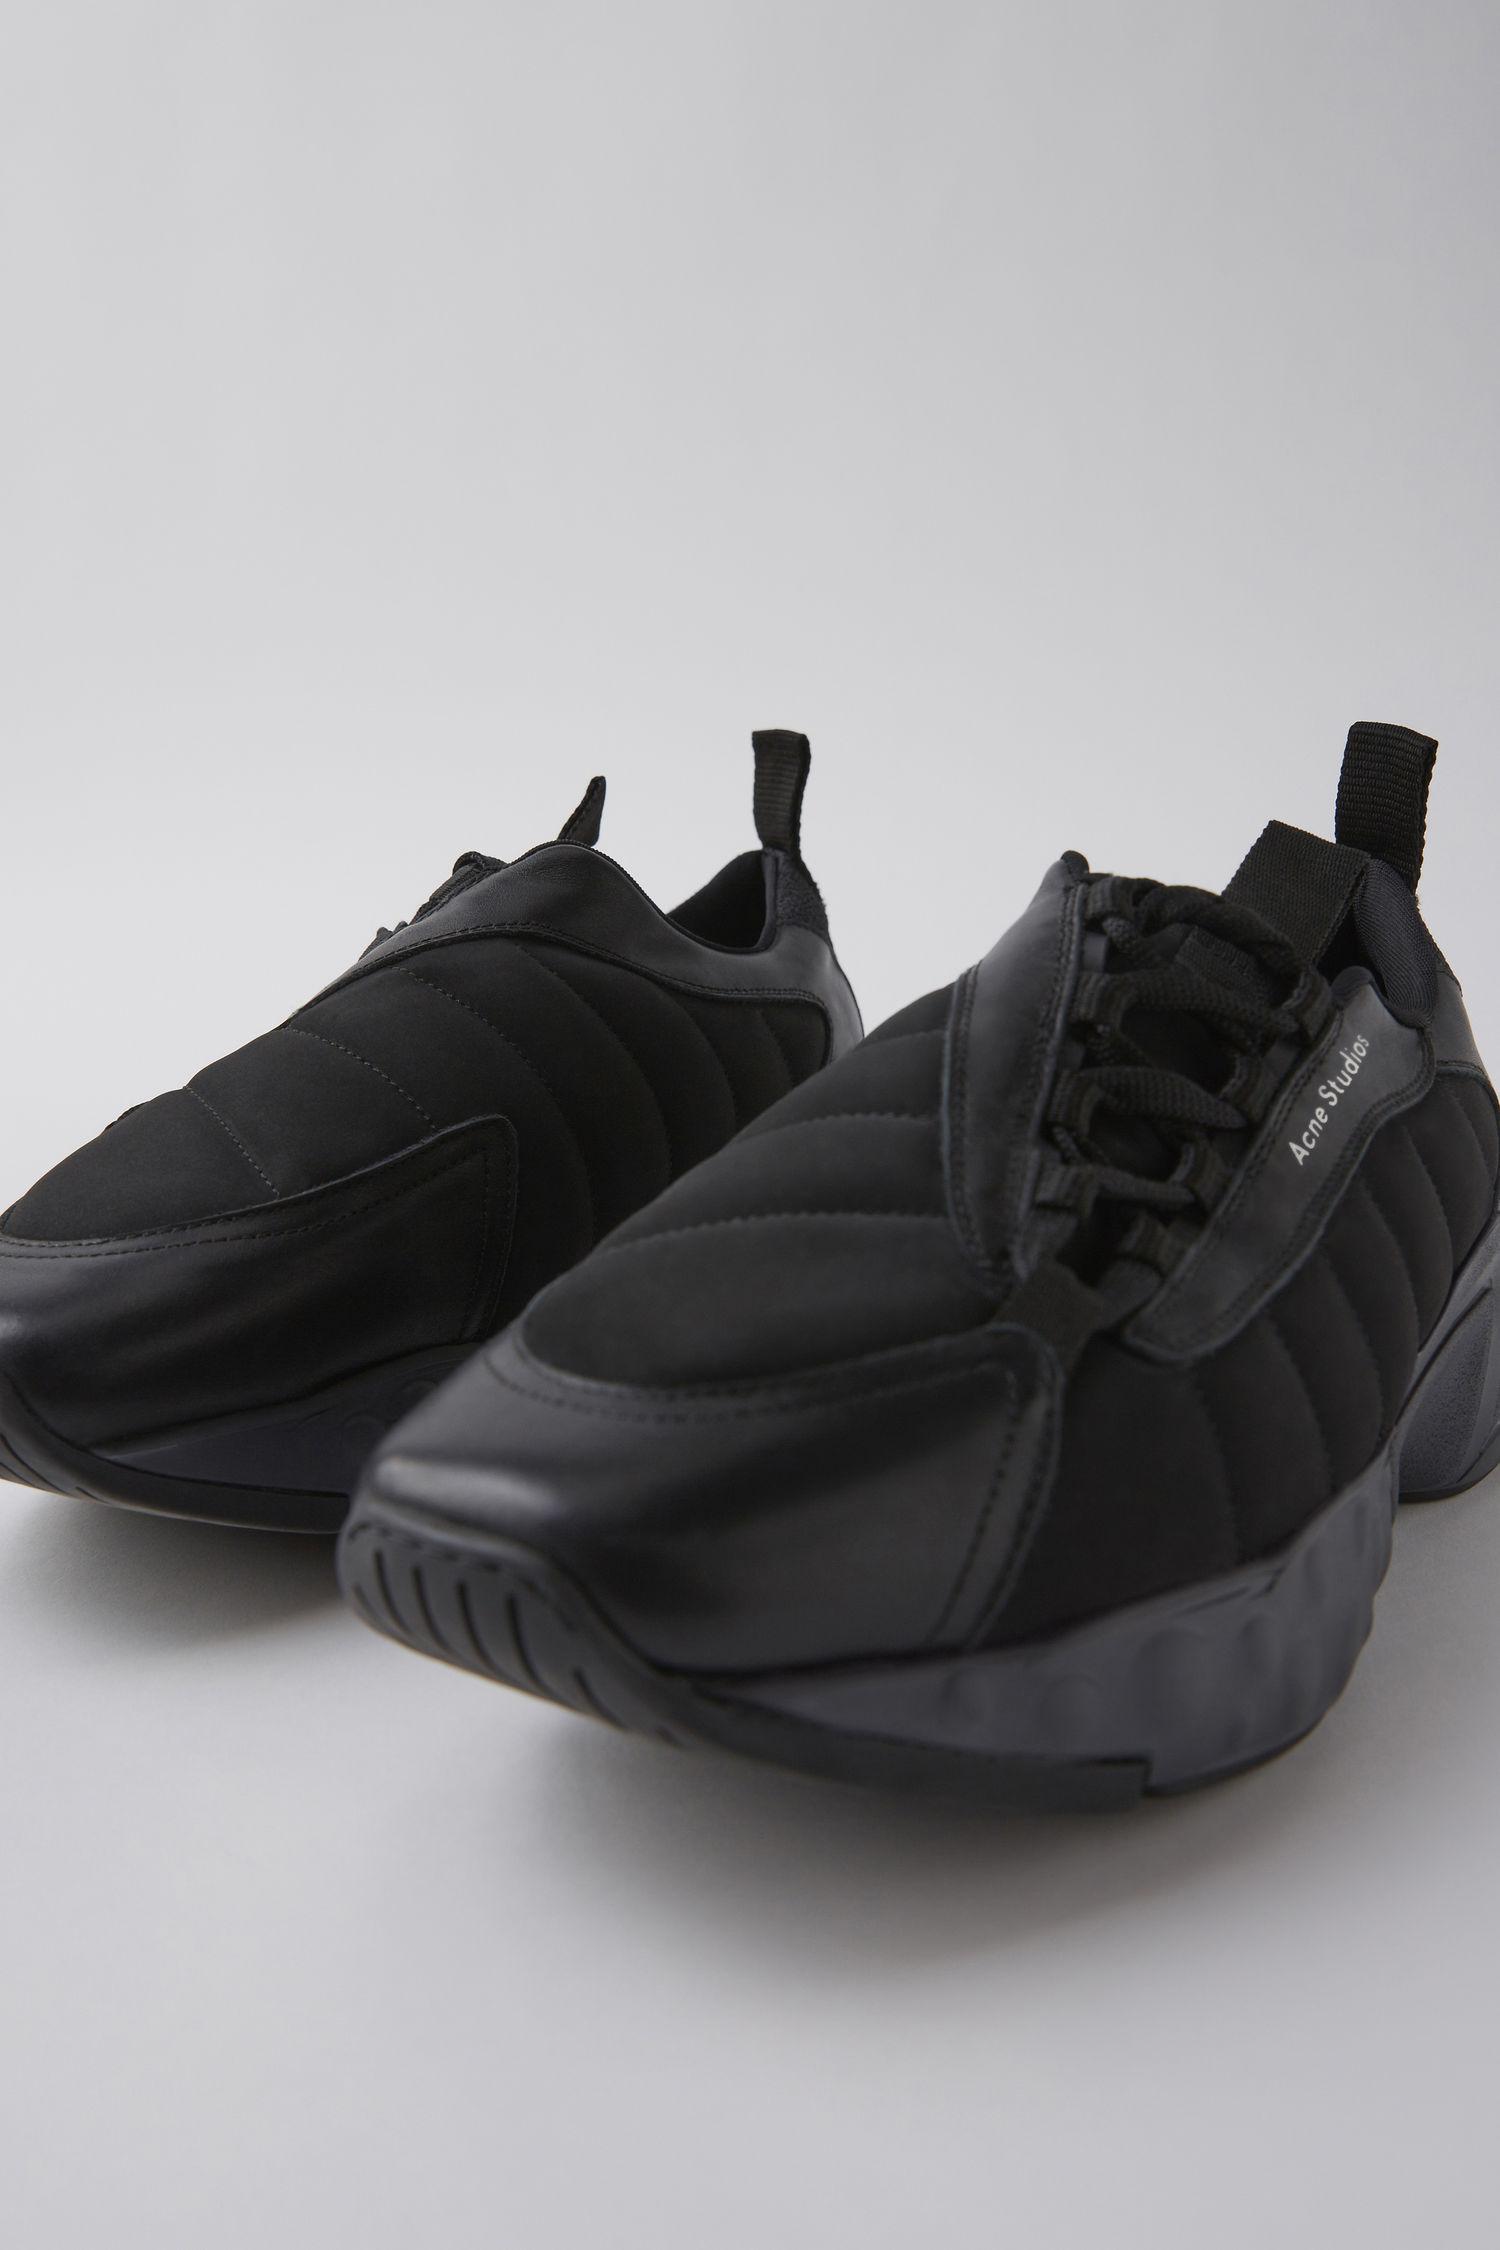 Acne Studios Synthetic Chunky Sneakers 